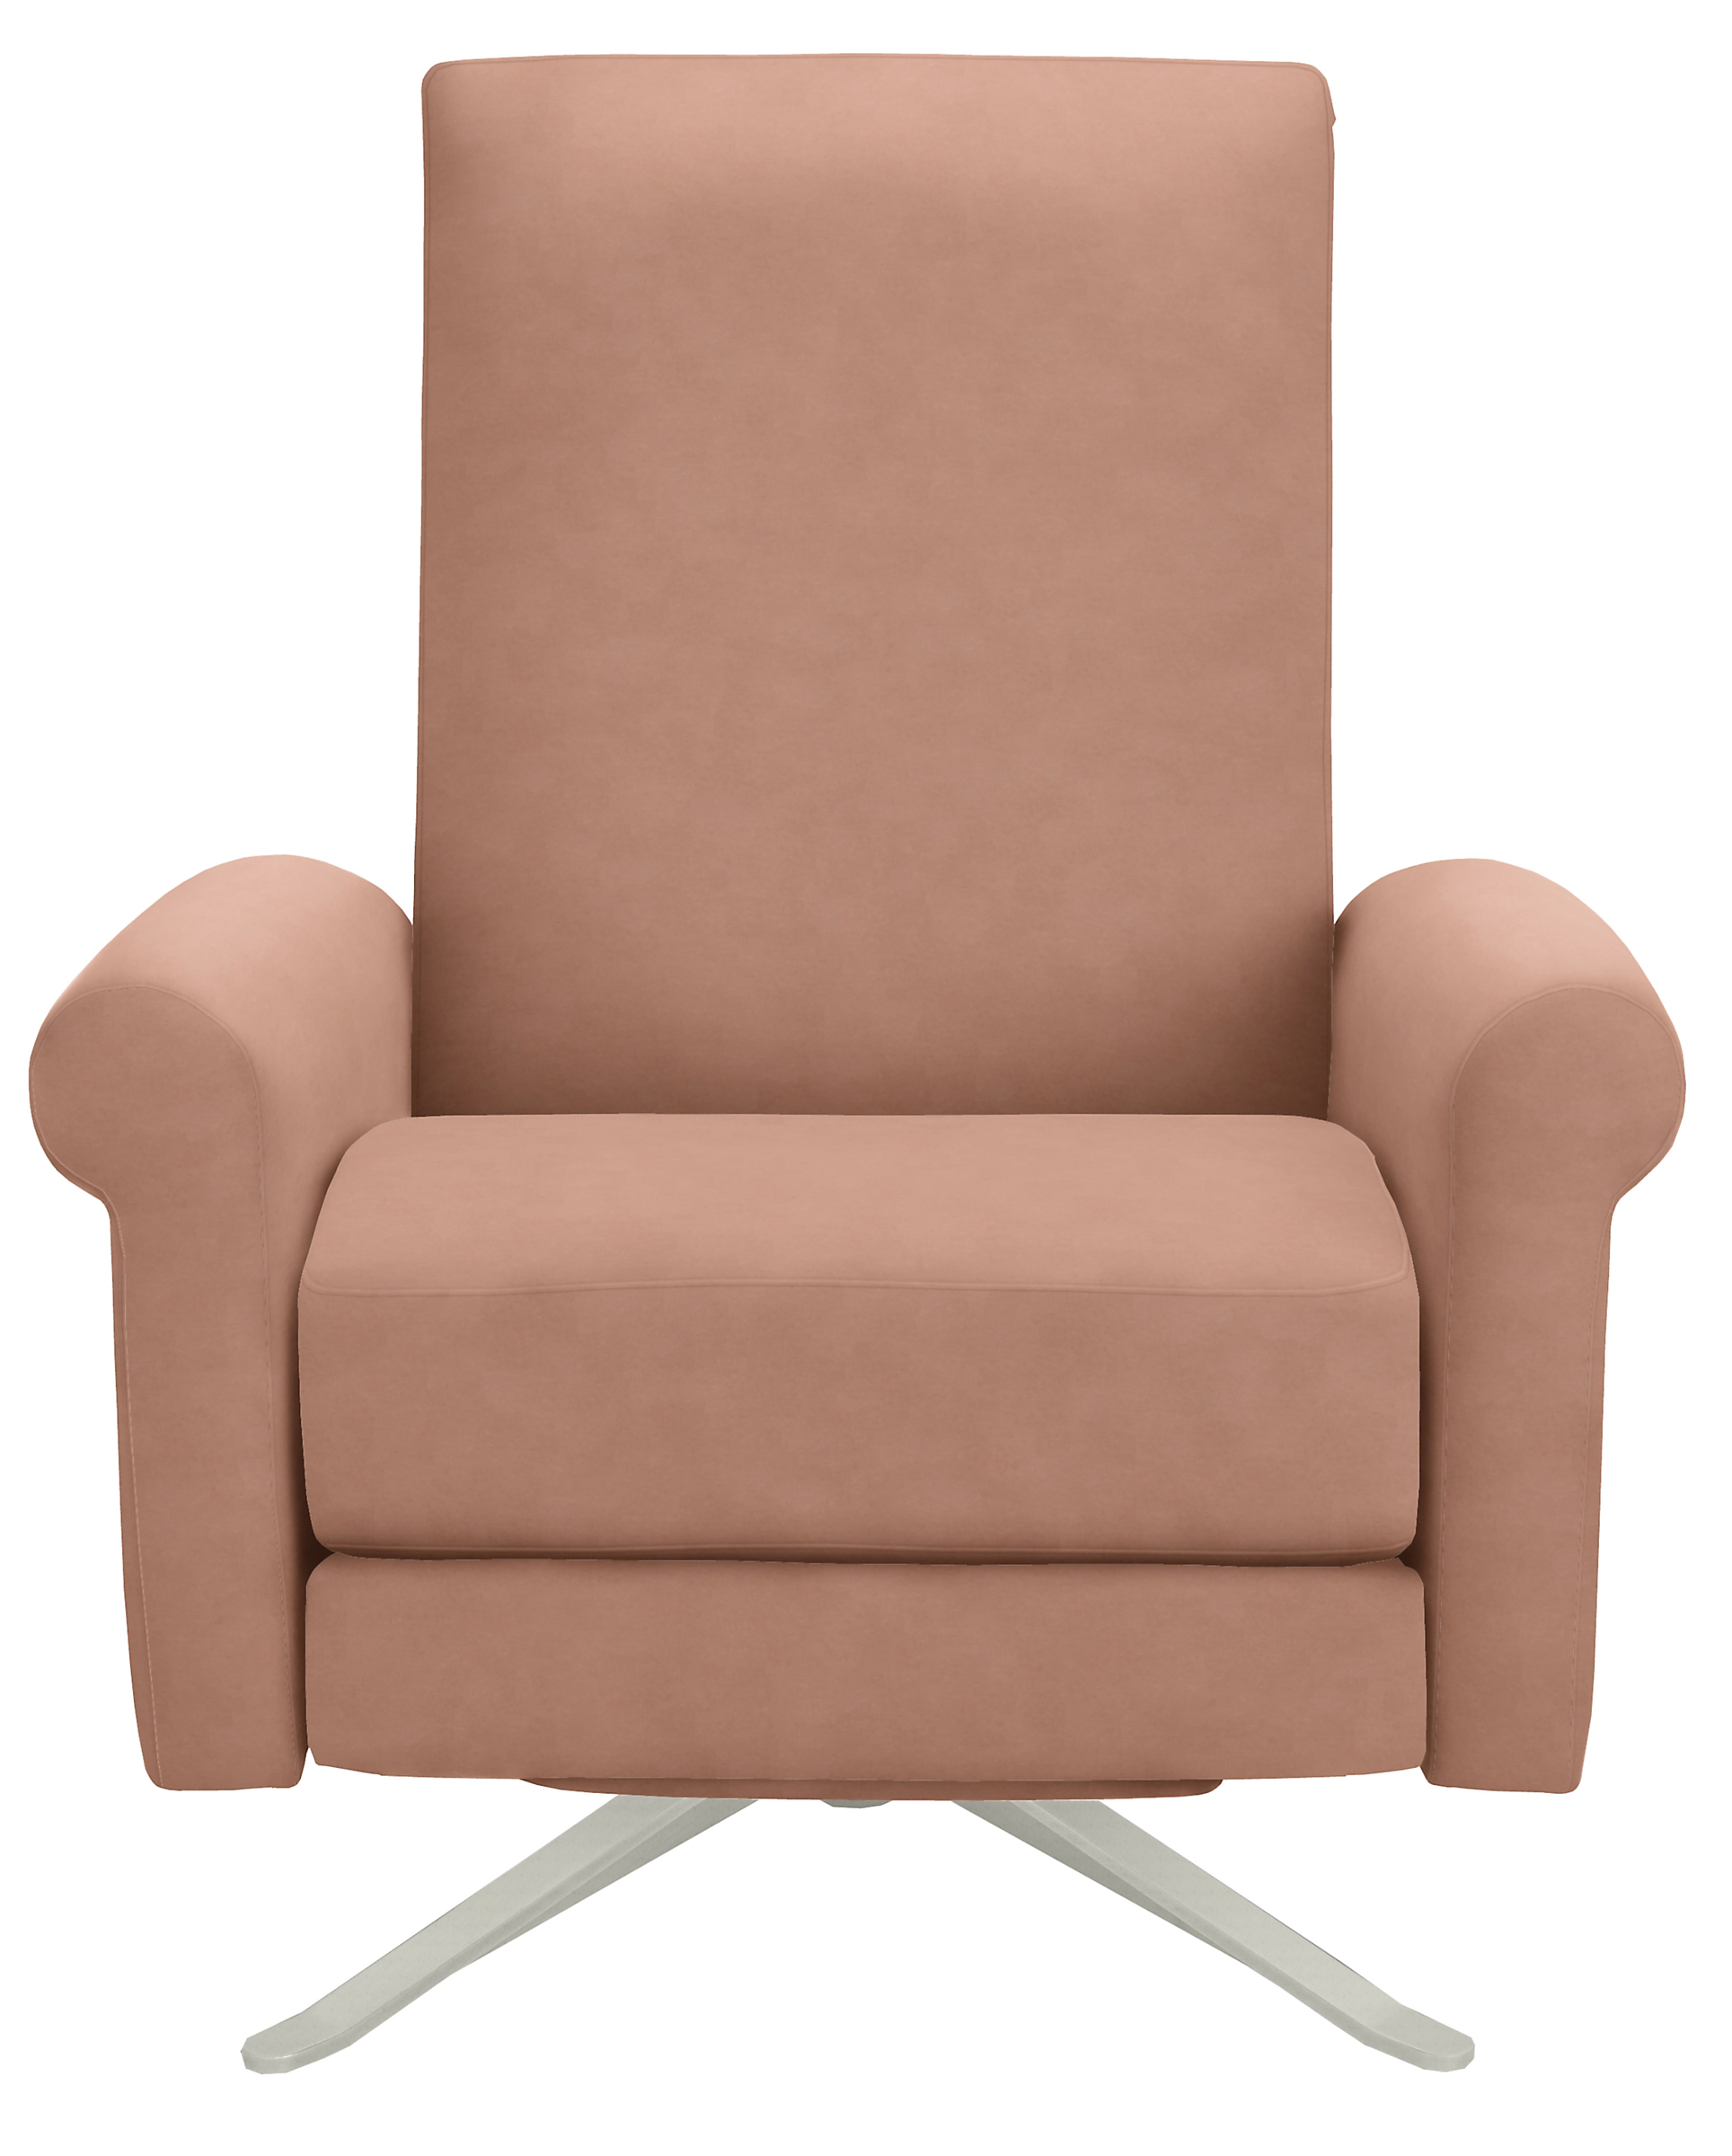 Arlo Rolled Arm Recliner in Vance Rose with Polished Nickel Swivel Base